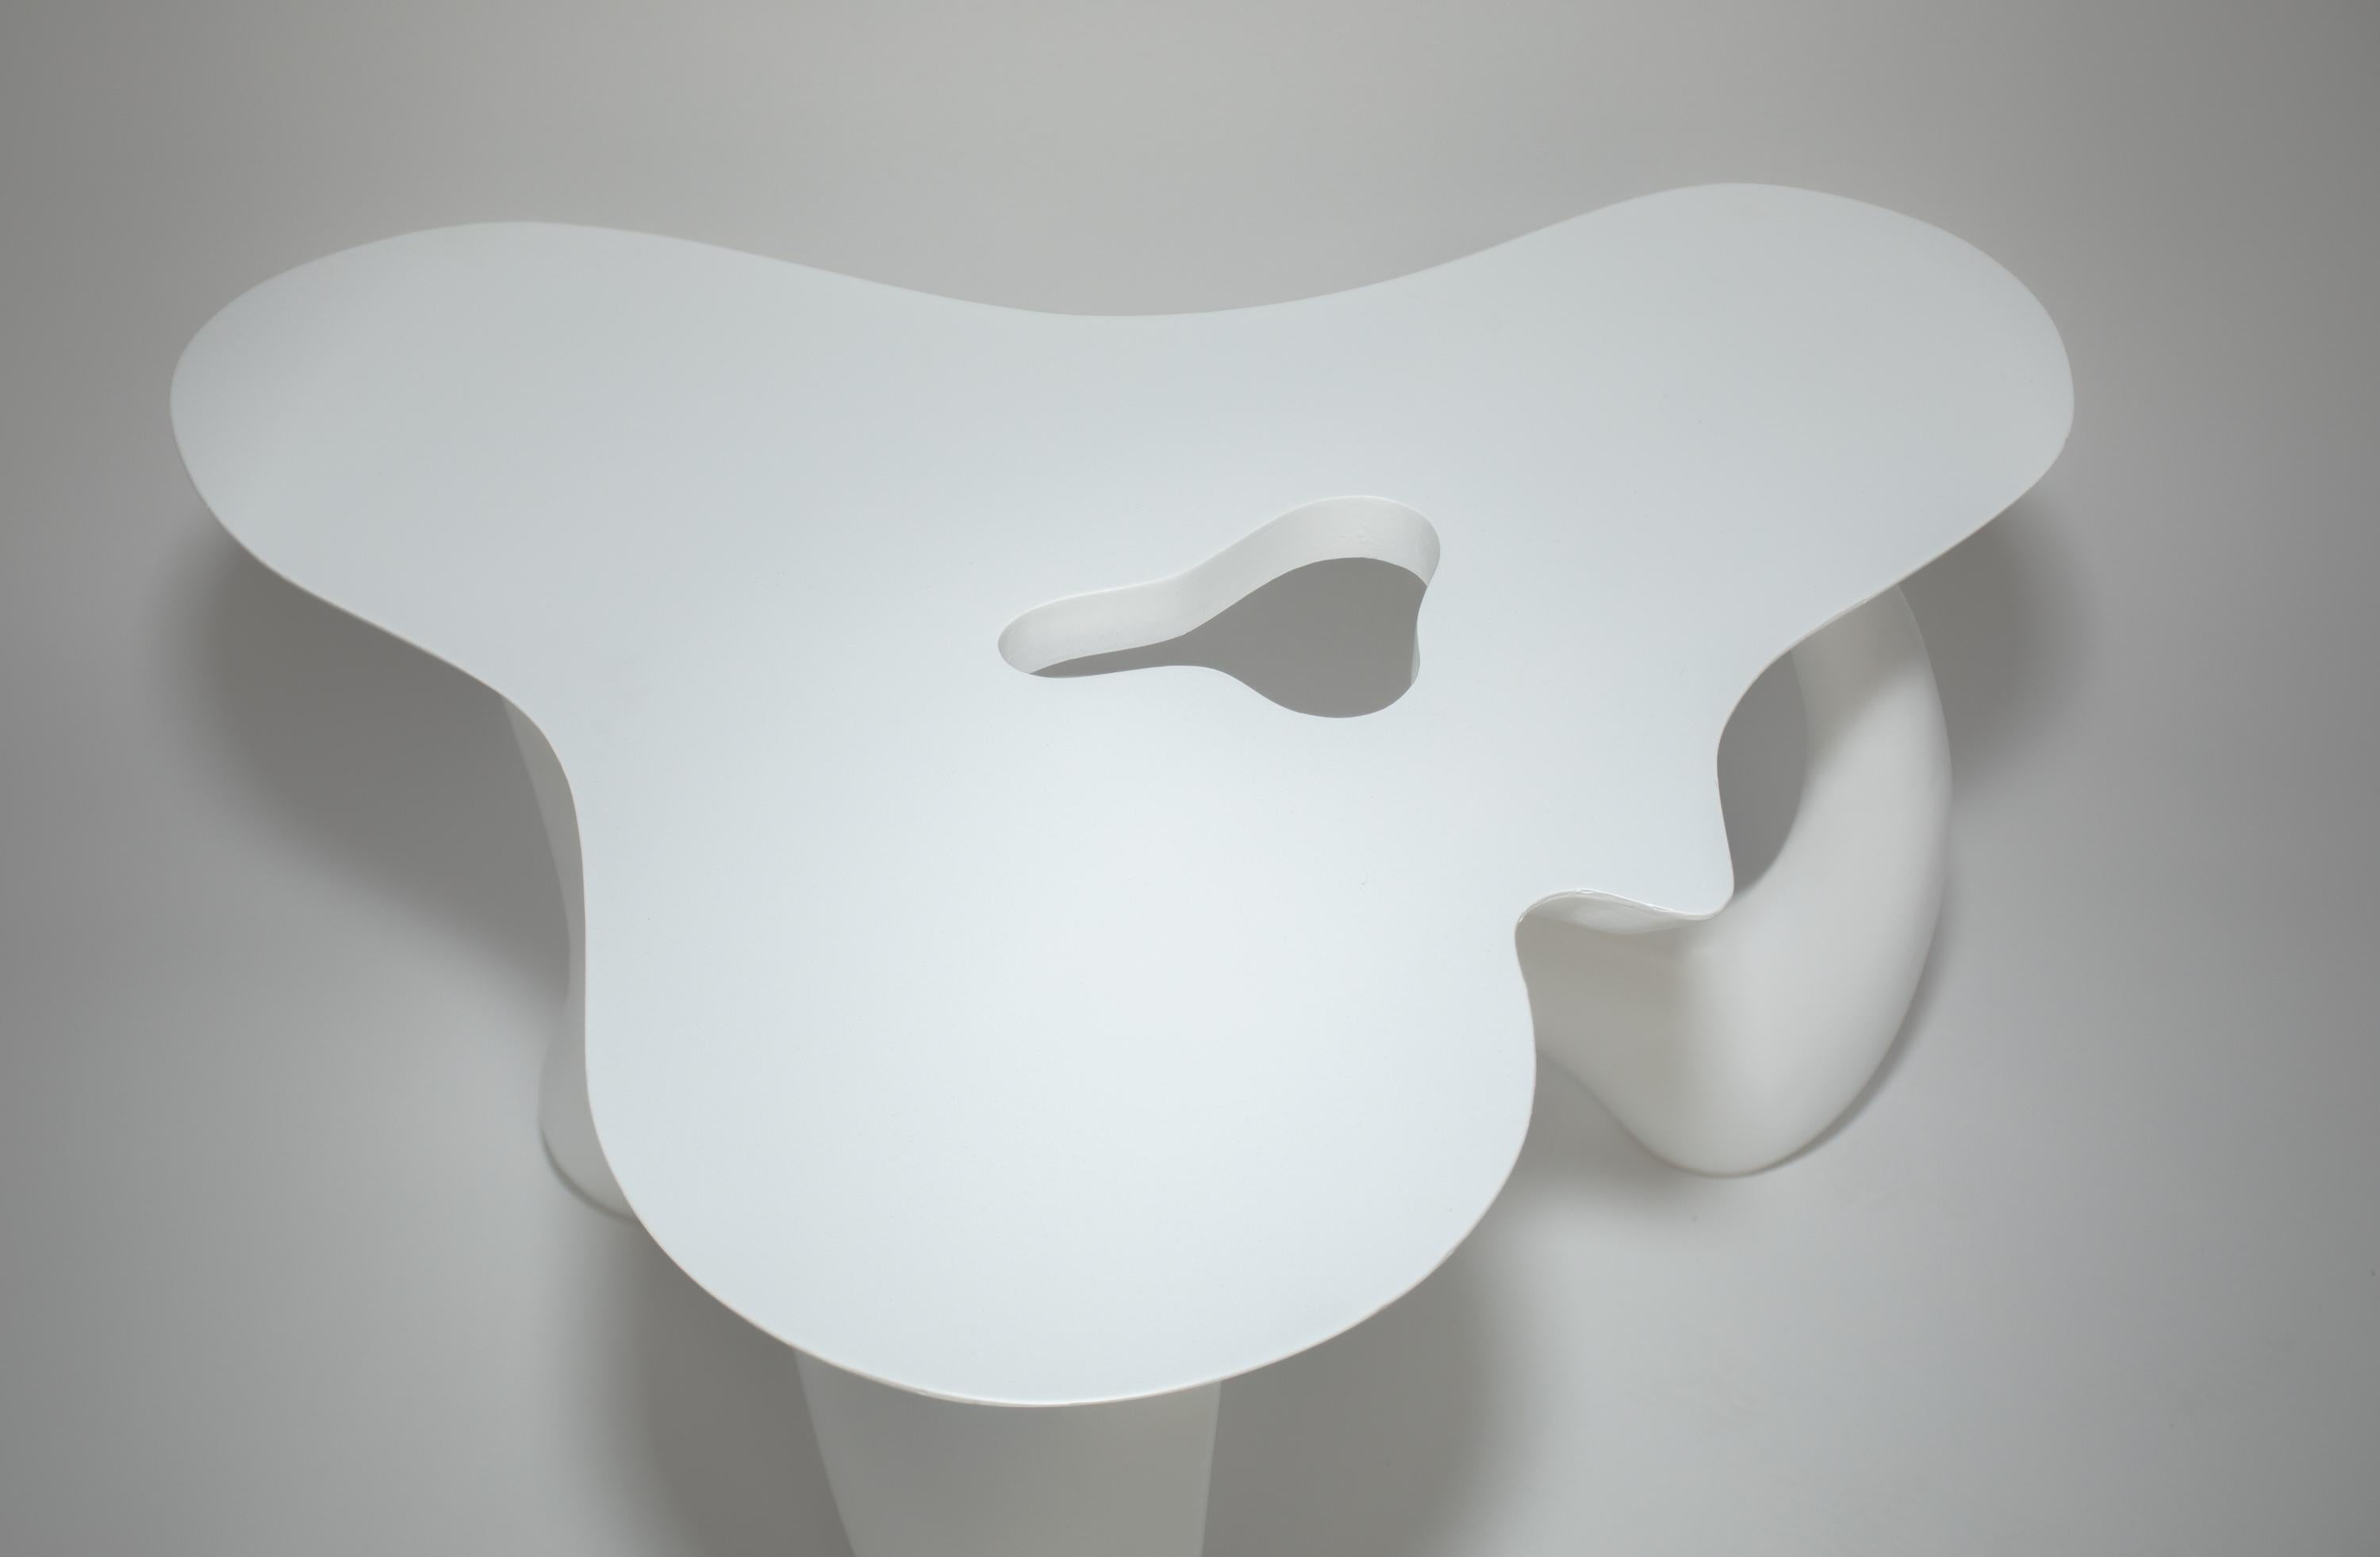 White Lacquered Biomorphic Table In Good Condition For Sale In West Palm Beach, FL